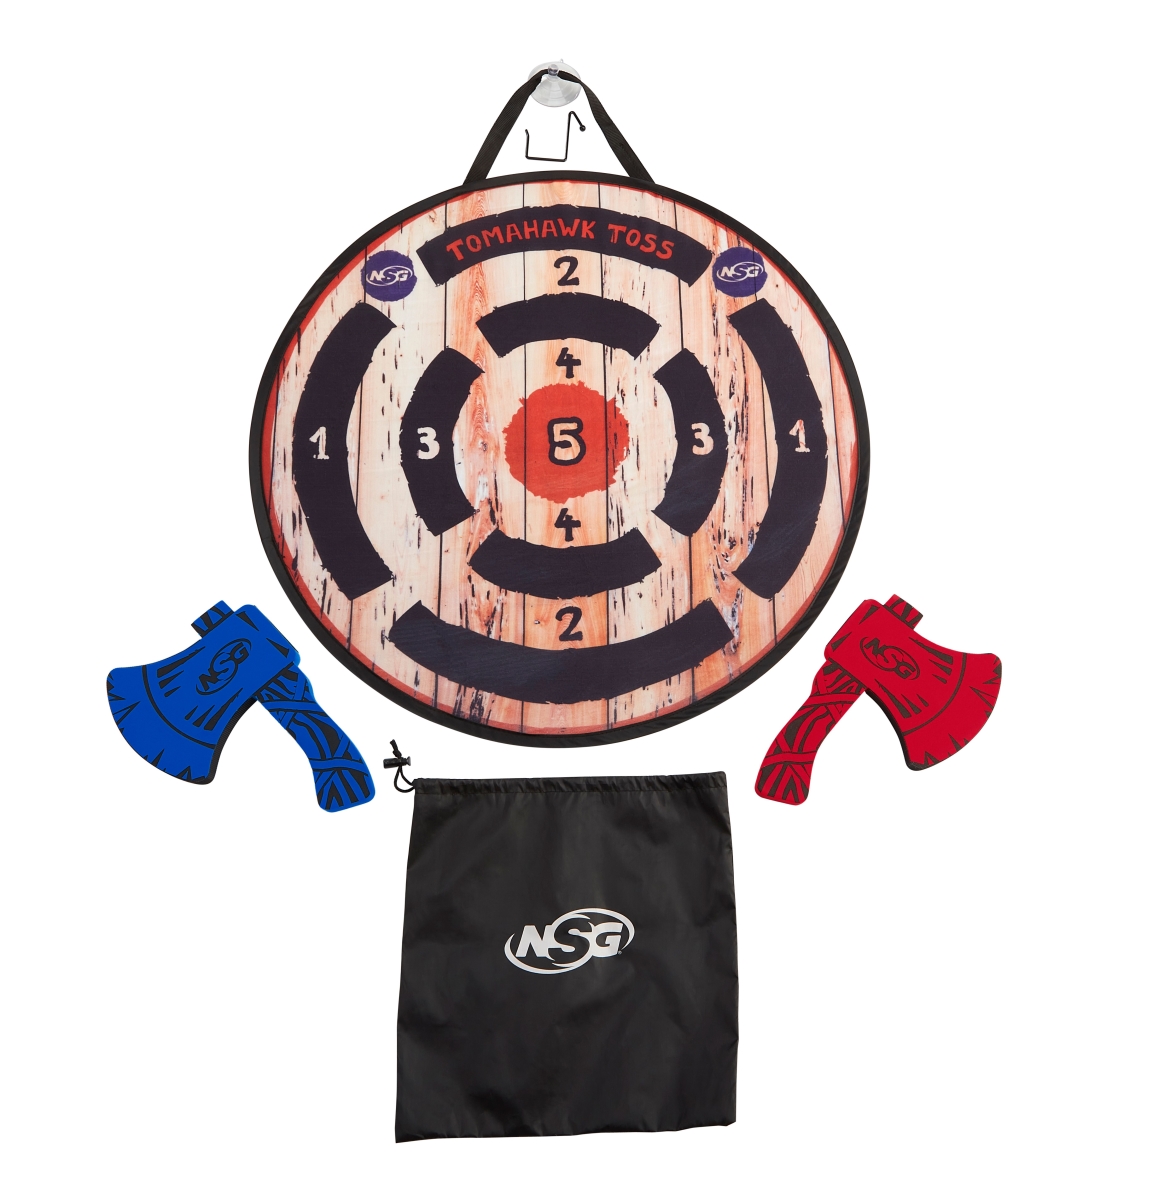 Picture of NSG JS7000 Axe Throwing Target Game - Multi Color